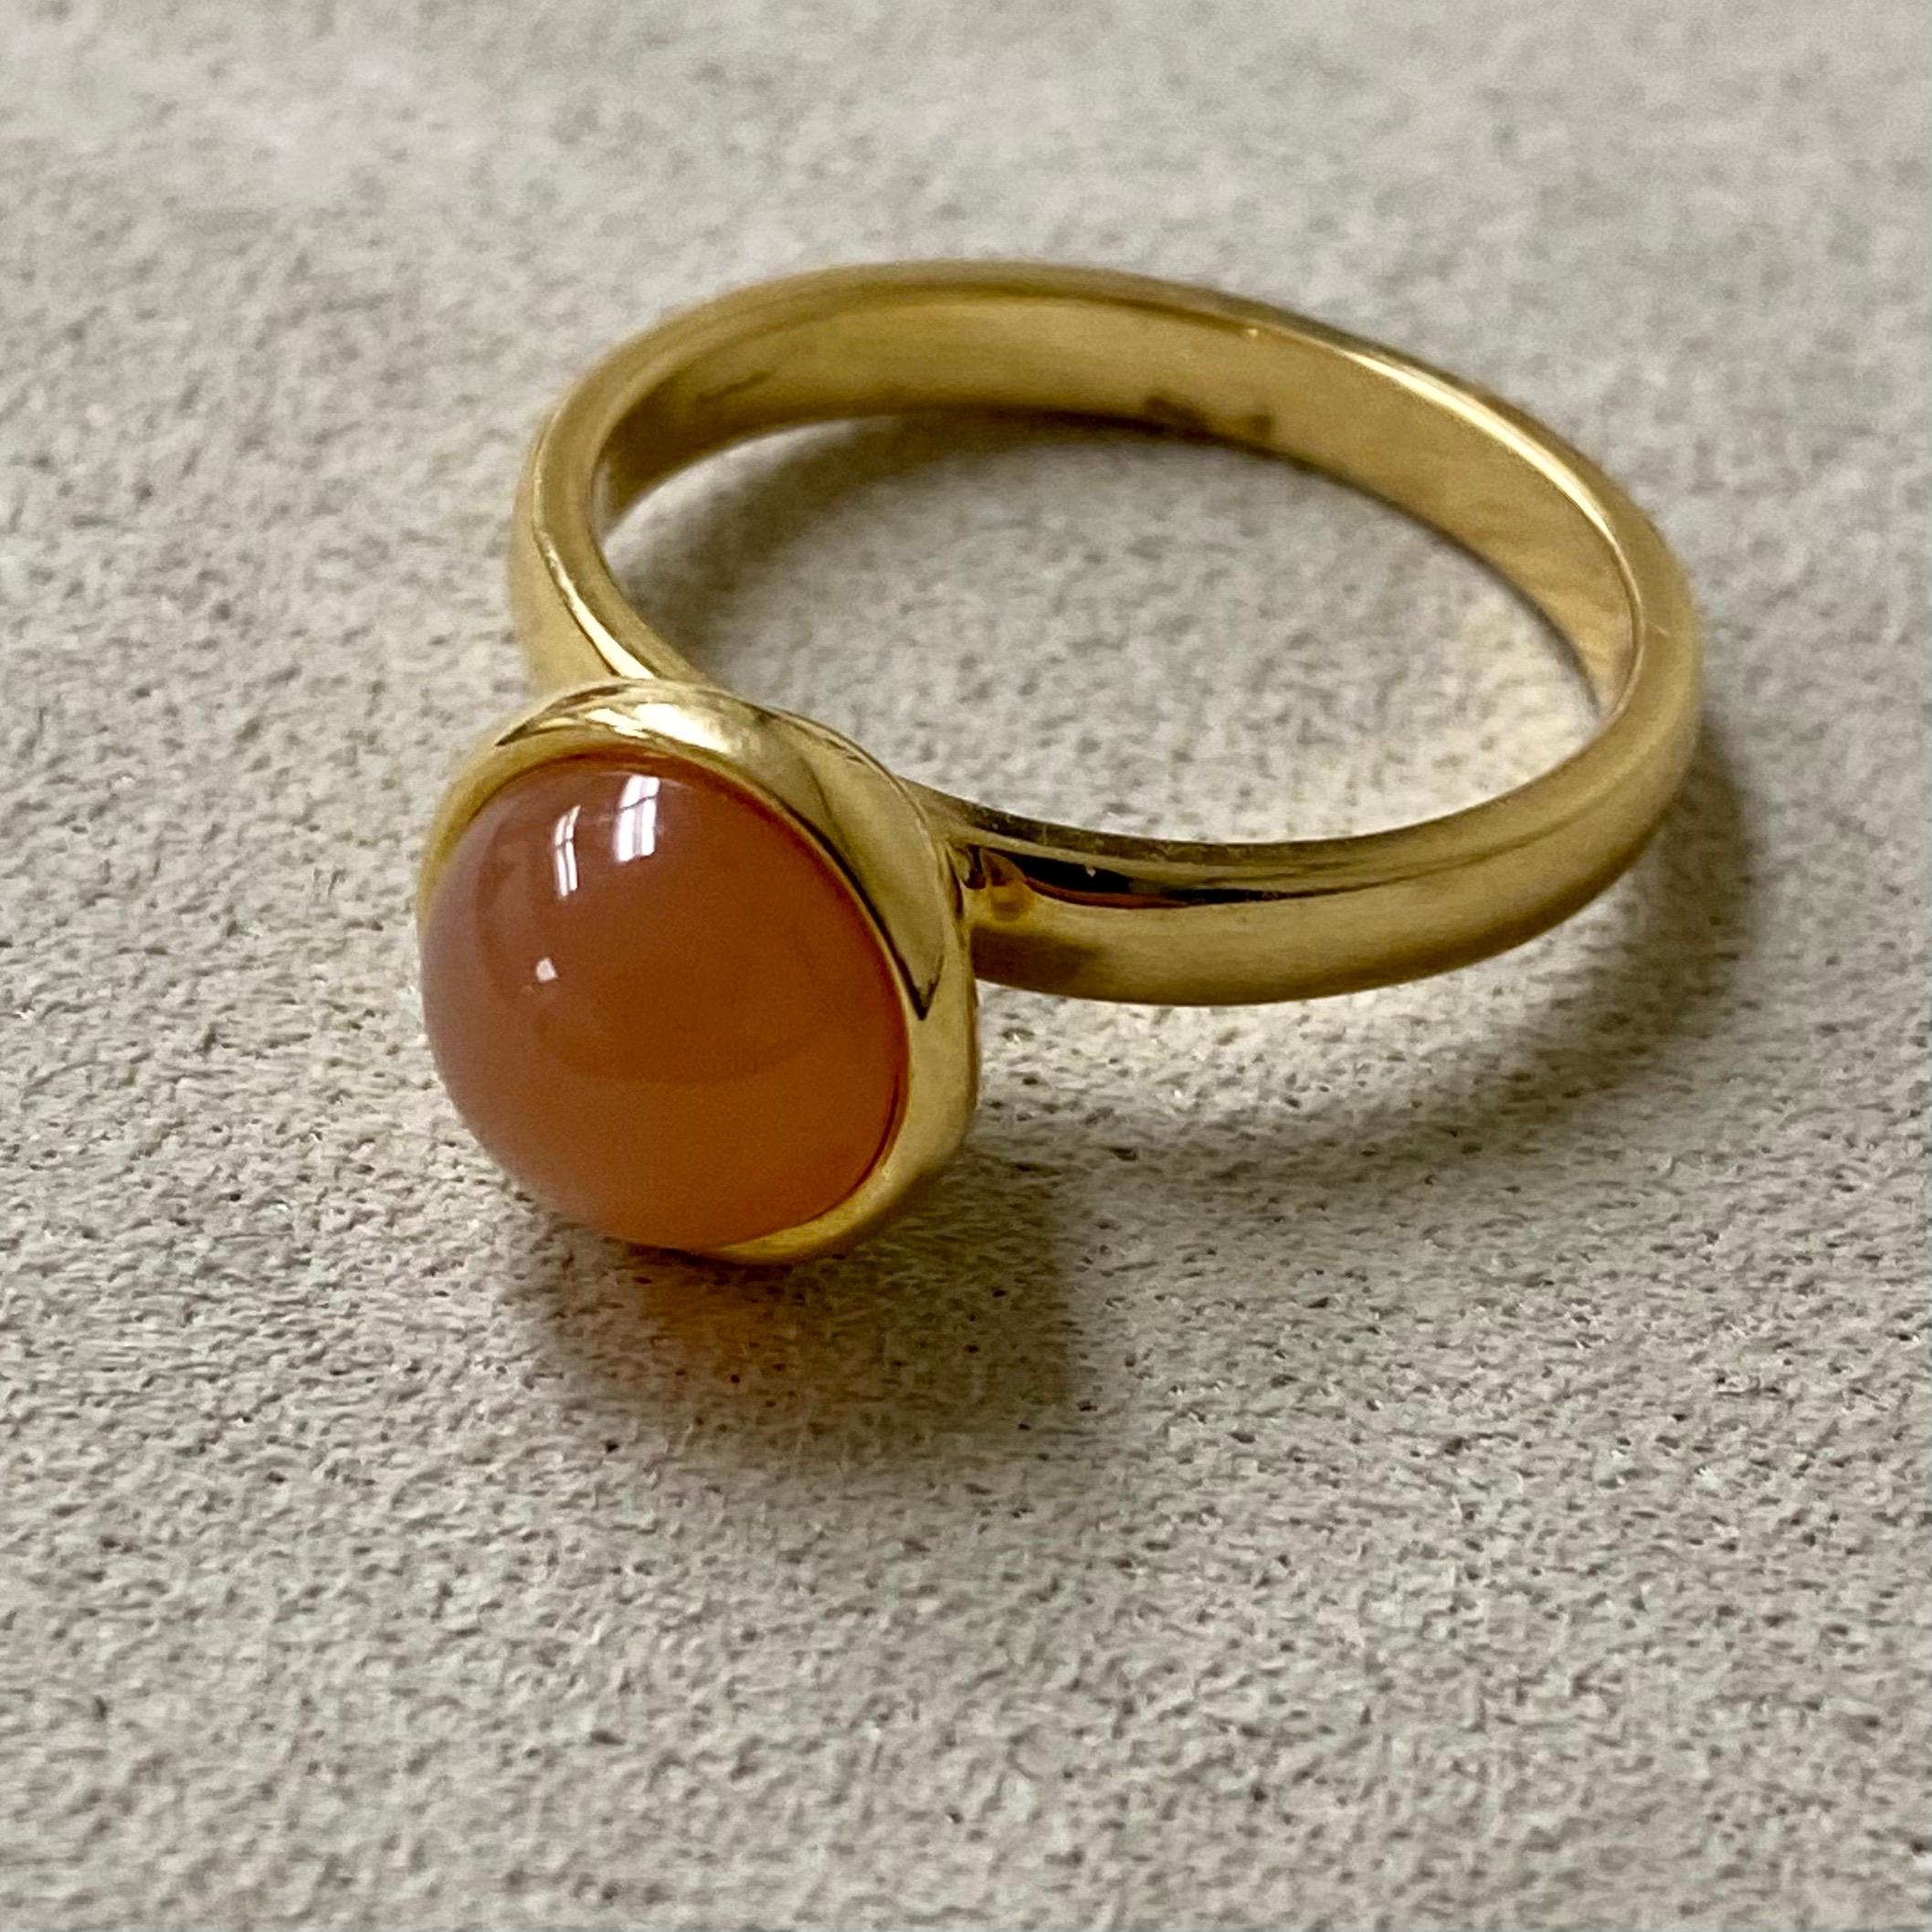 Created in 18 karat yellow gold
Peach Moonstone 2 carats approx.
Ring size US 6.5, can be sized upon request.

Composed of 18 karat yellow gold, this regal Ring proudly presents a Peach Moonstone centrepiece of approximately 2 carats and is